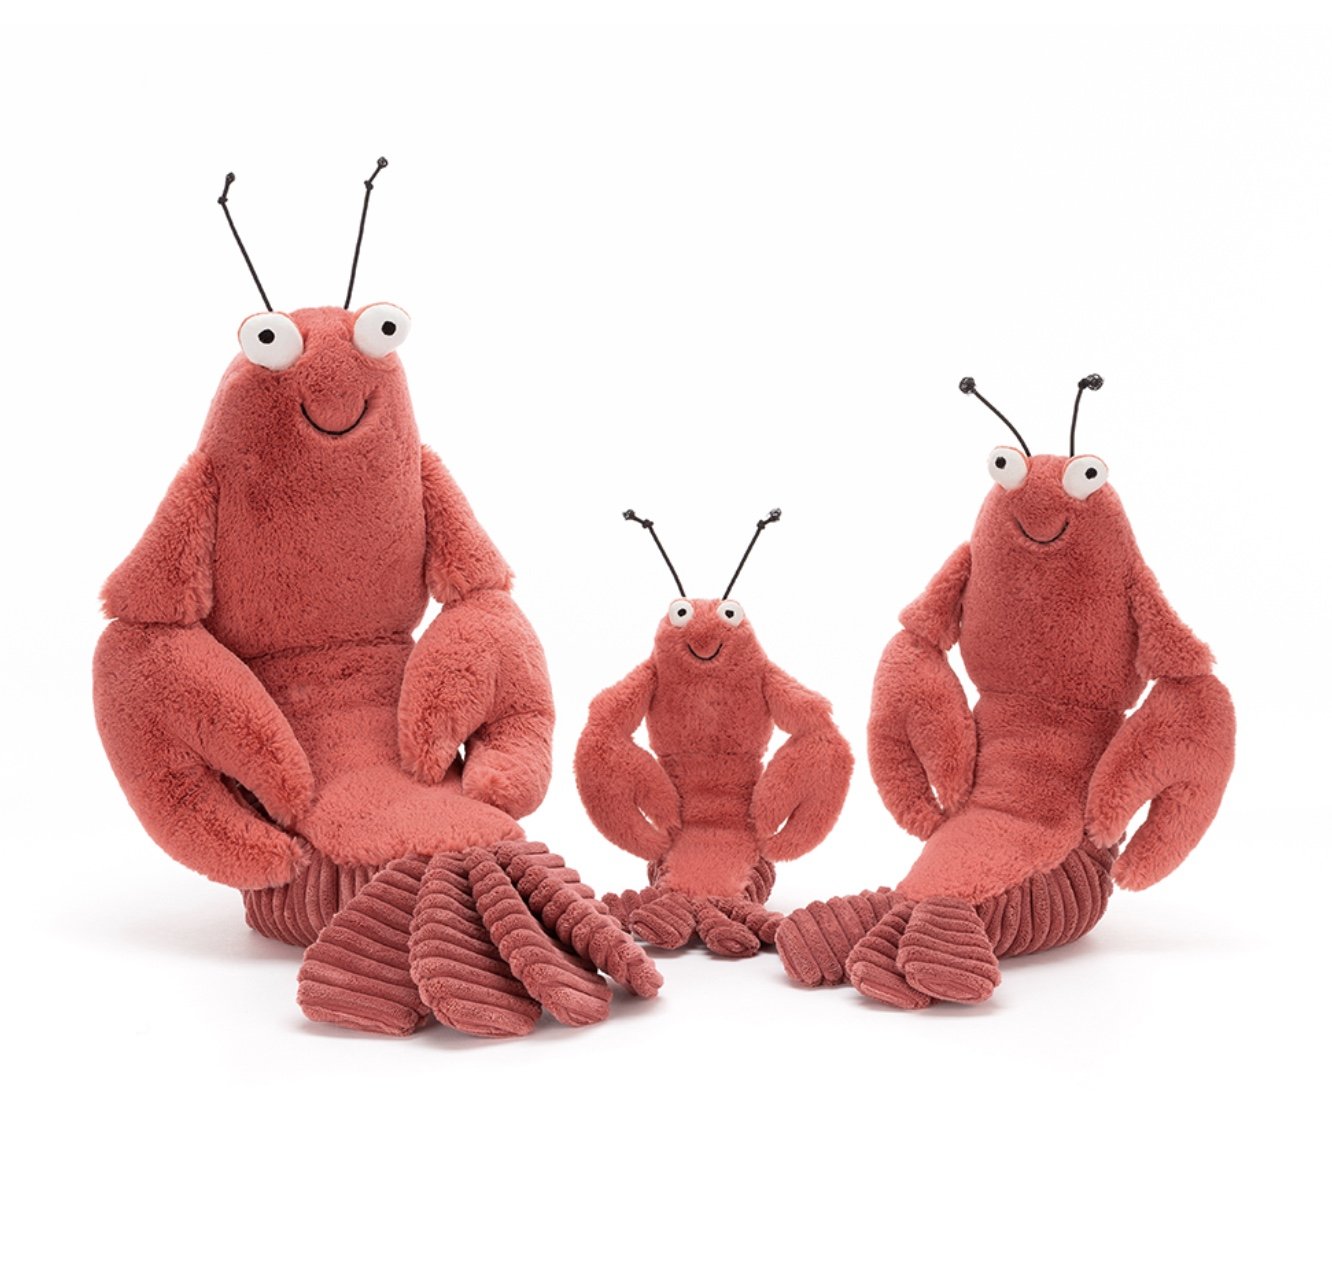 larry the lobster plush